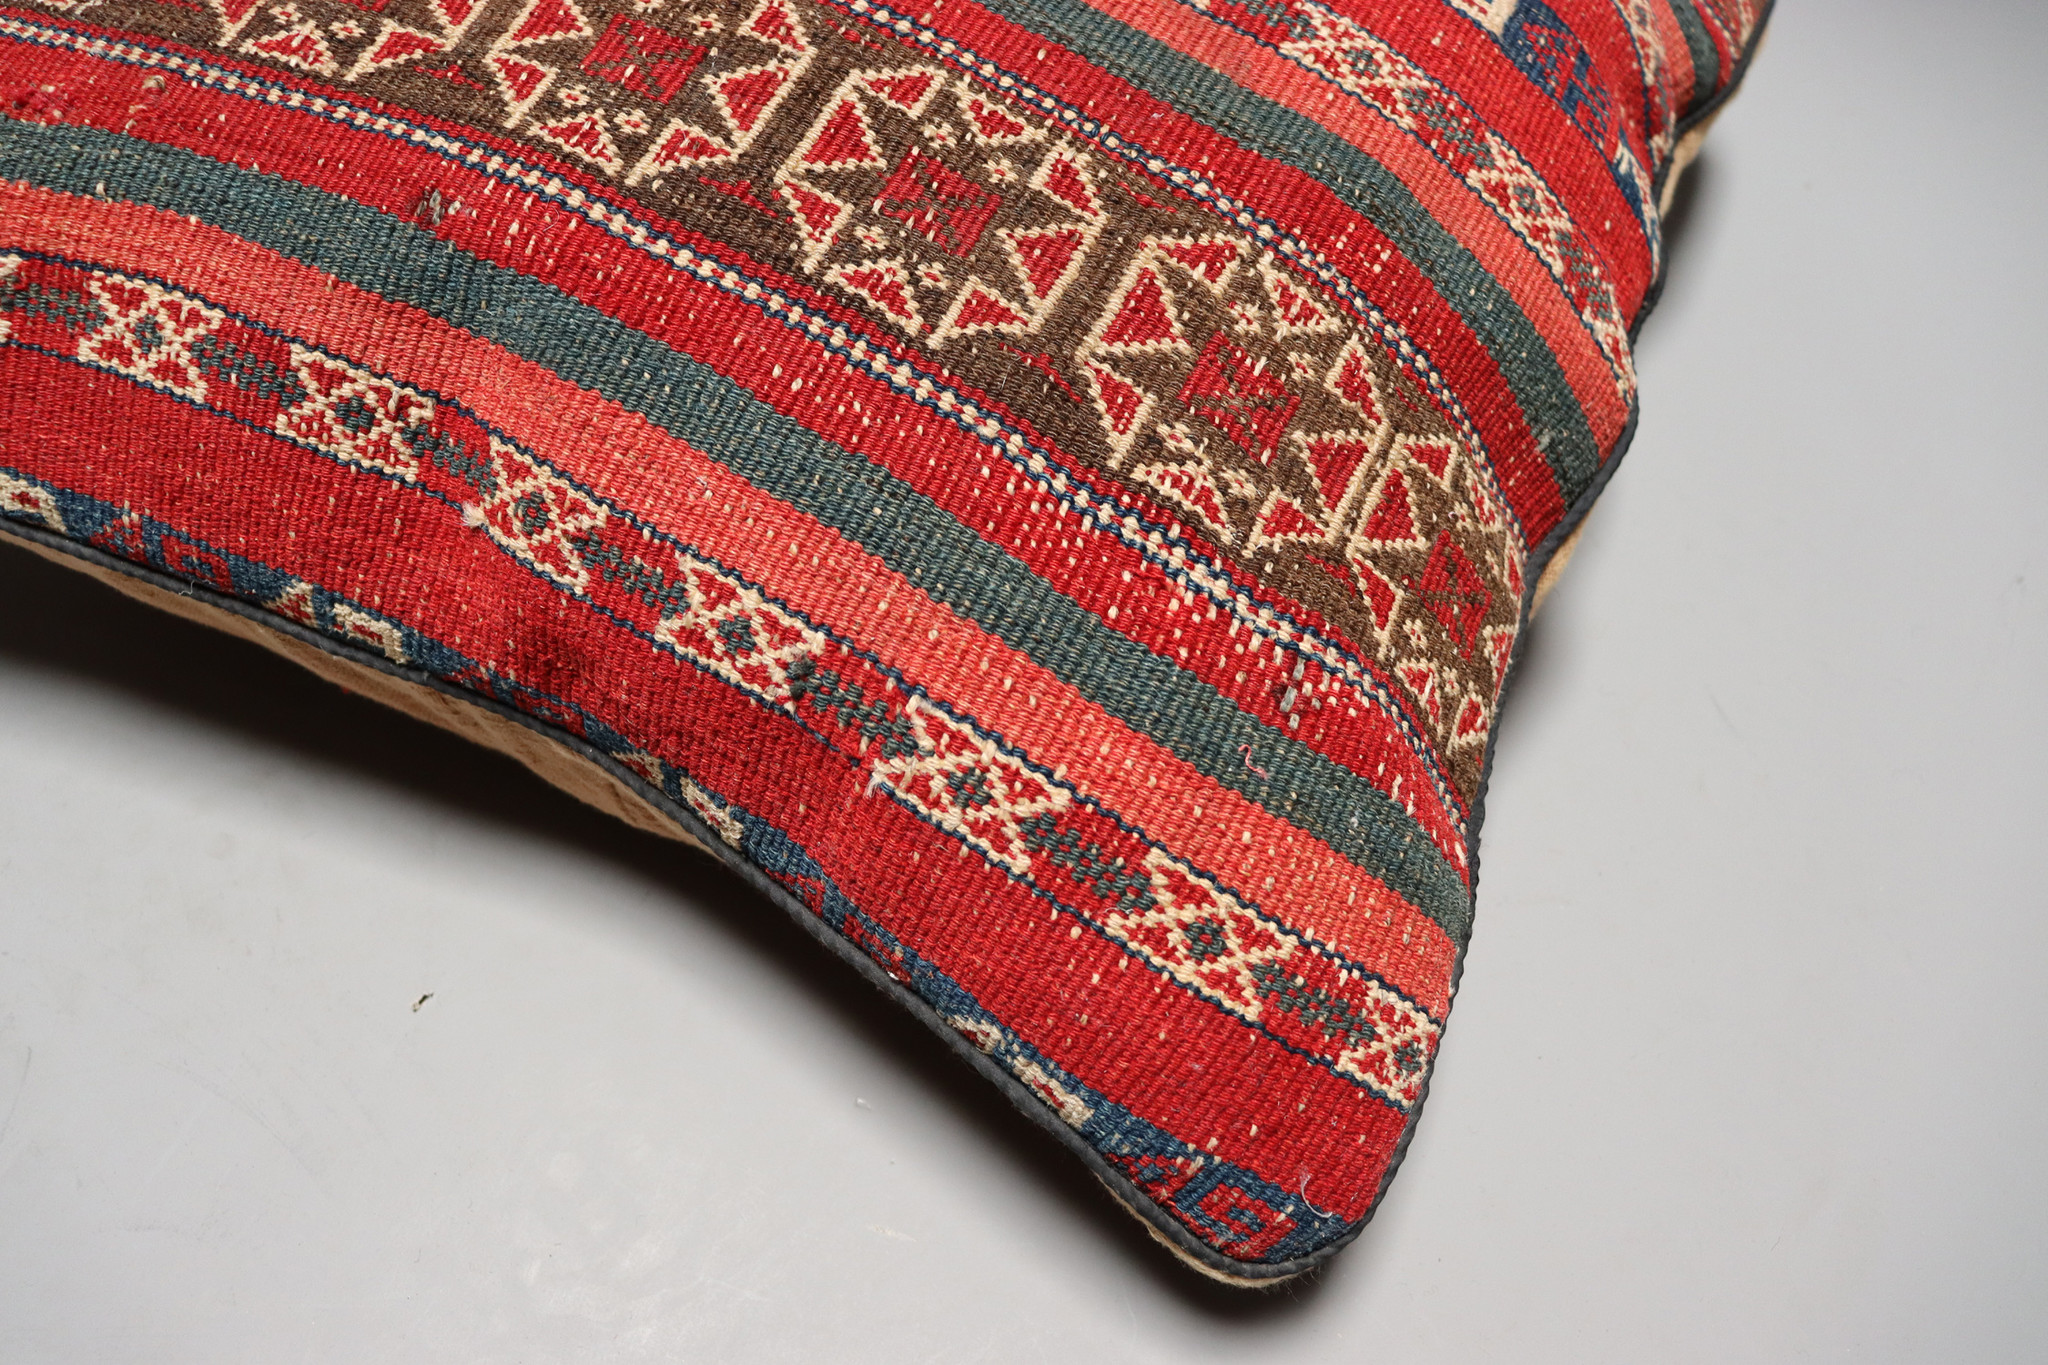 55x55 cm Antique Kilim pillowcase  from Afghanistan No:22/G